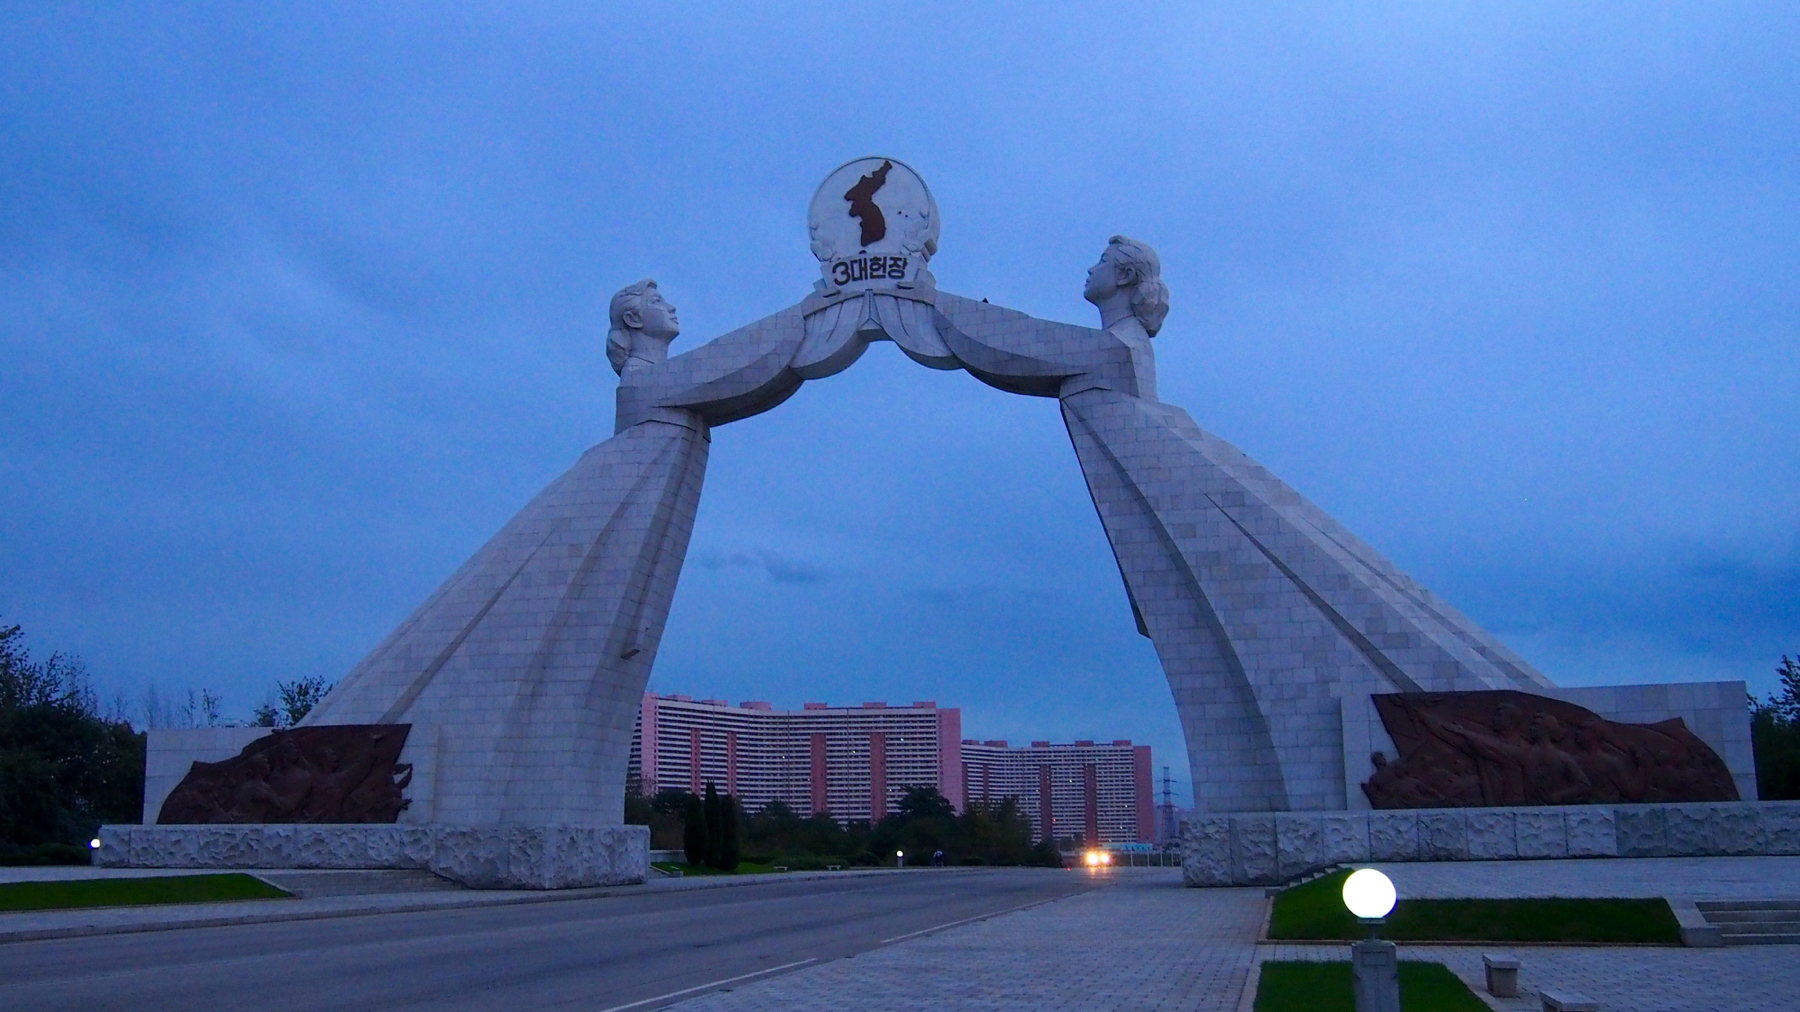 A quick stop on our way back into Pyongyang featured this gate representing the two halves of the country coming together in reunification.